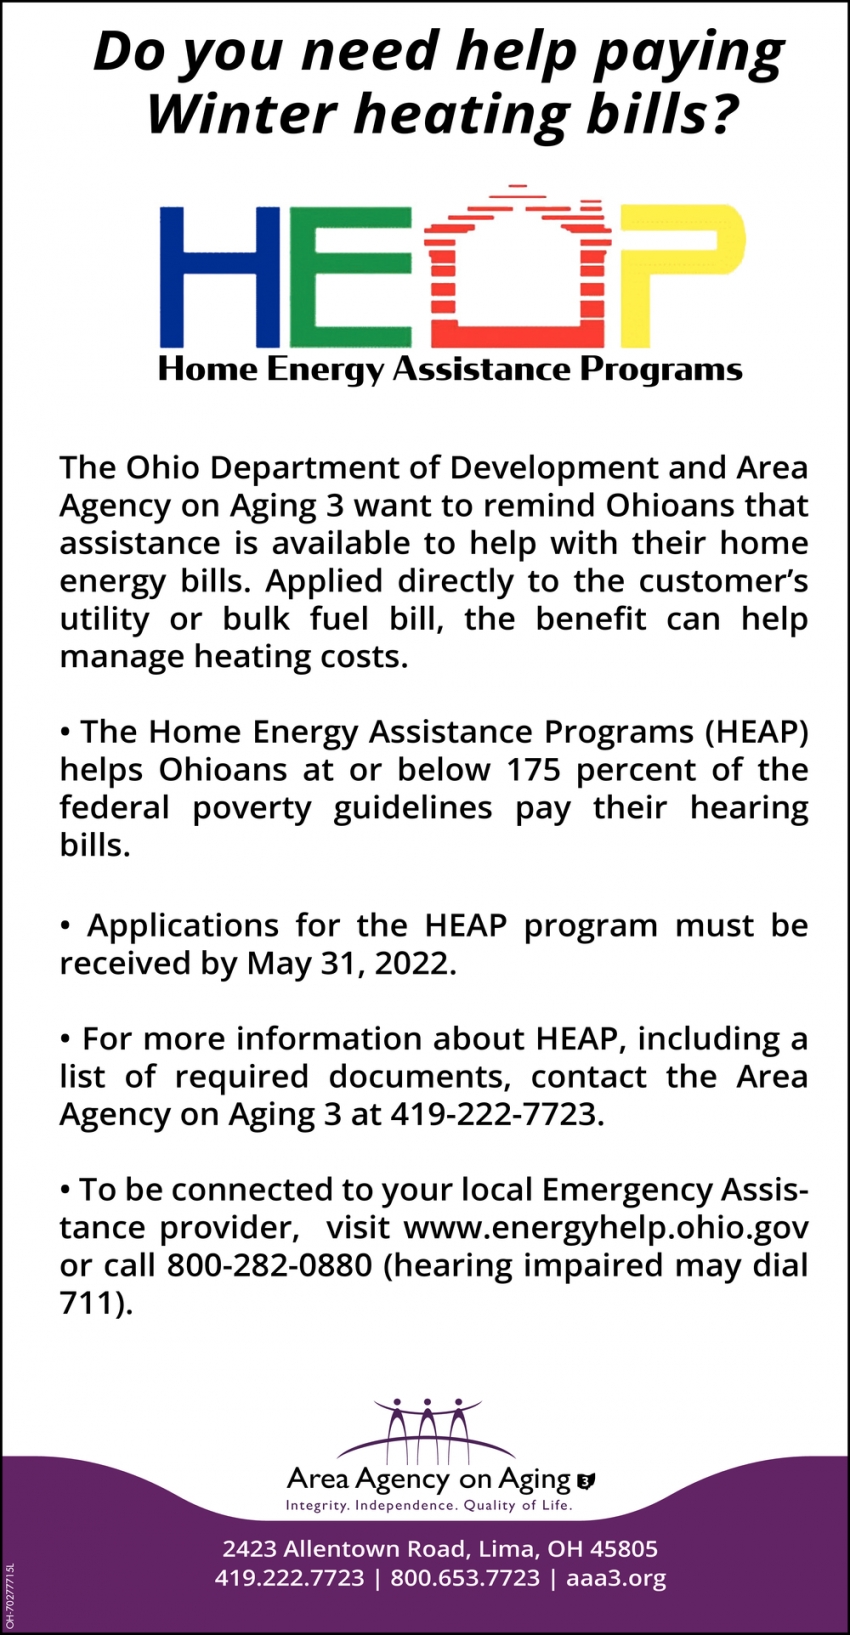 Home Energy Assistance Programs